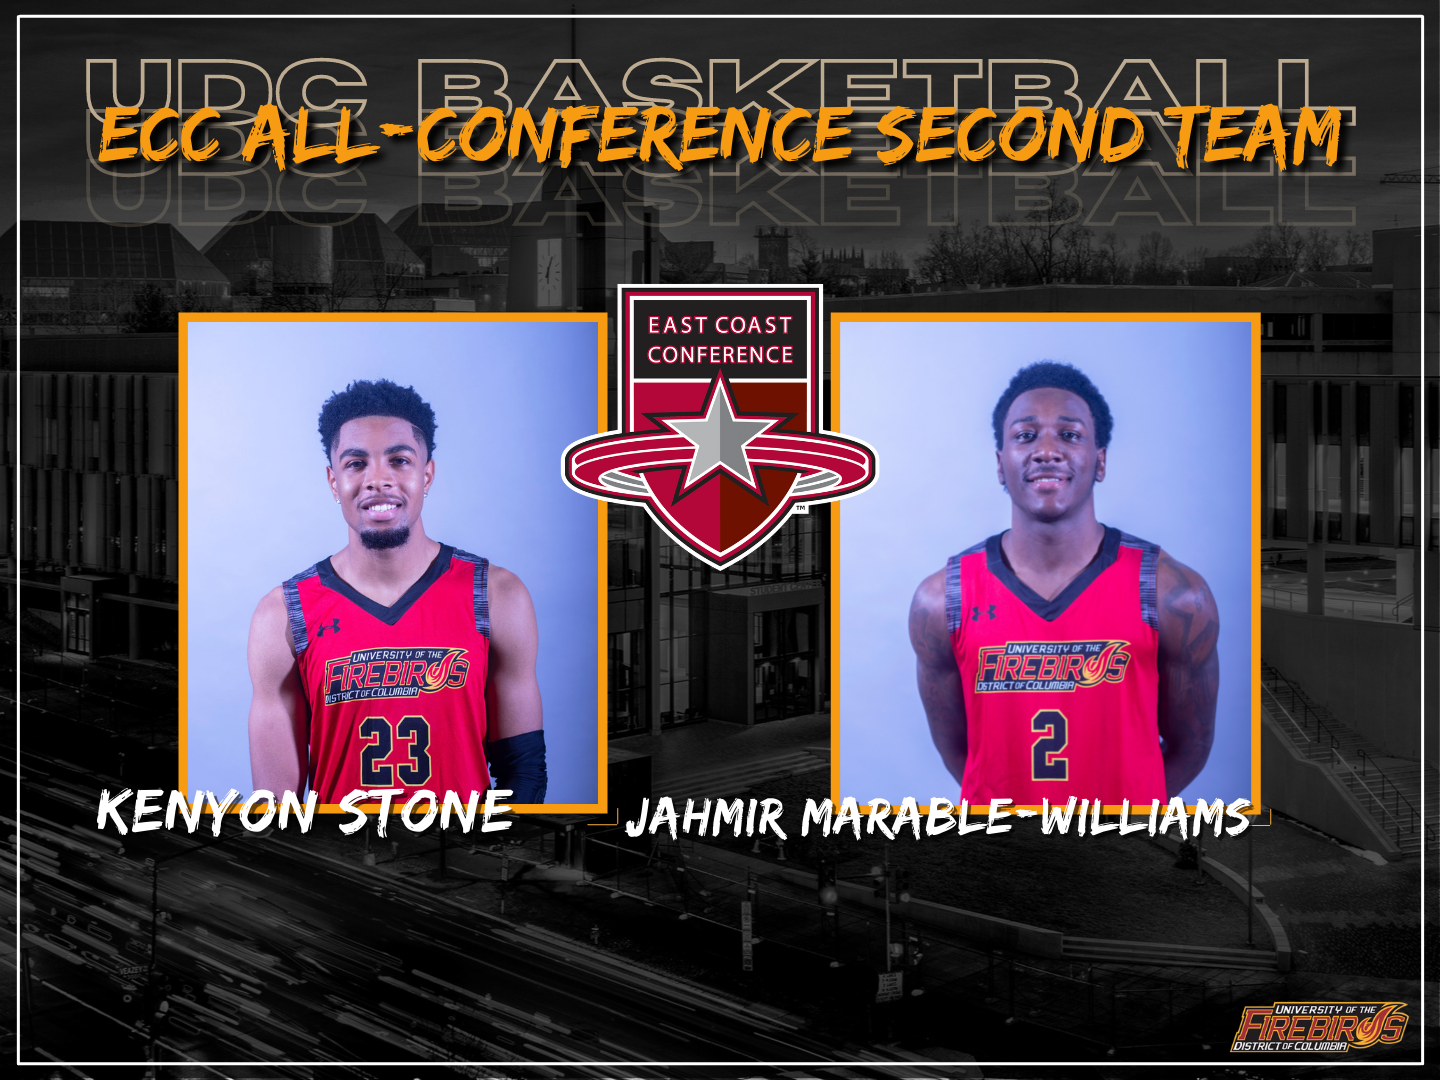 Kenyon Stone and Jahmir Marable-Williams Earns ECC All-Conference Honors